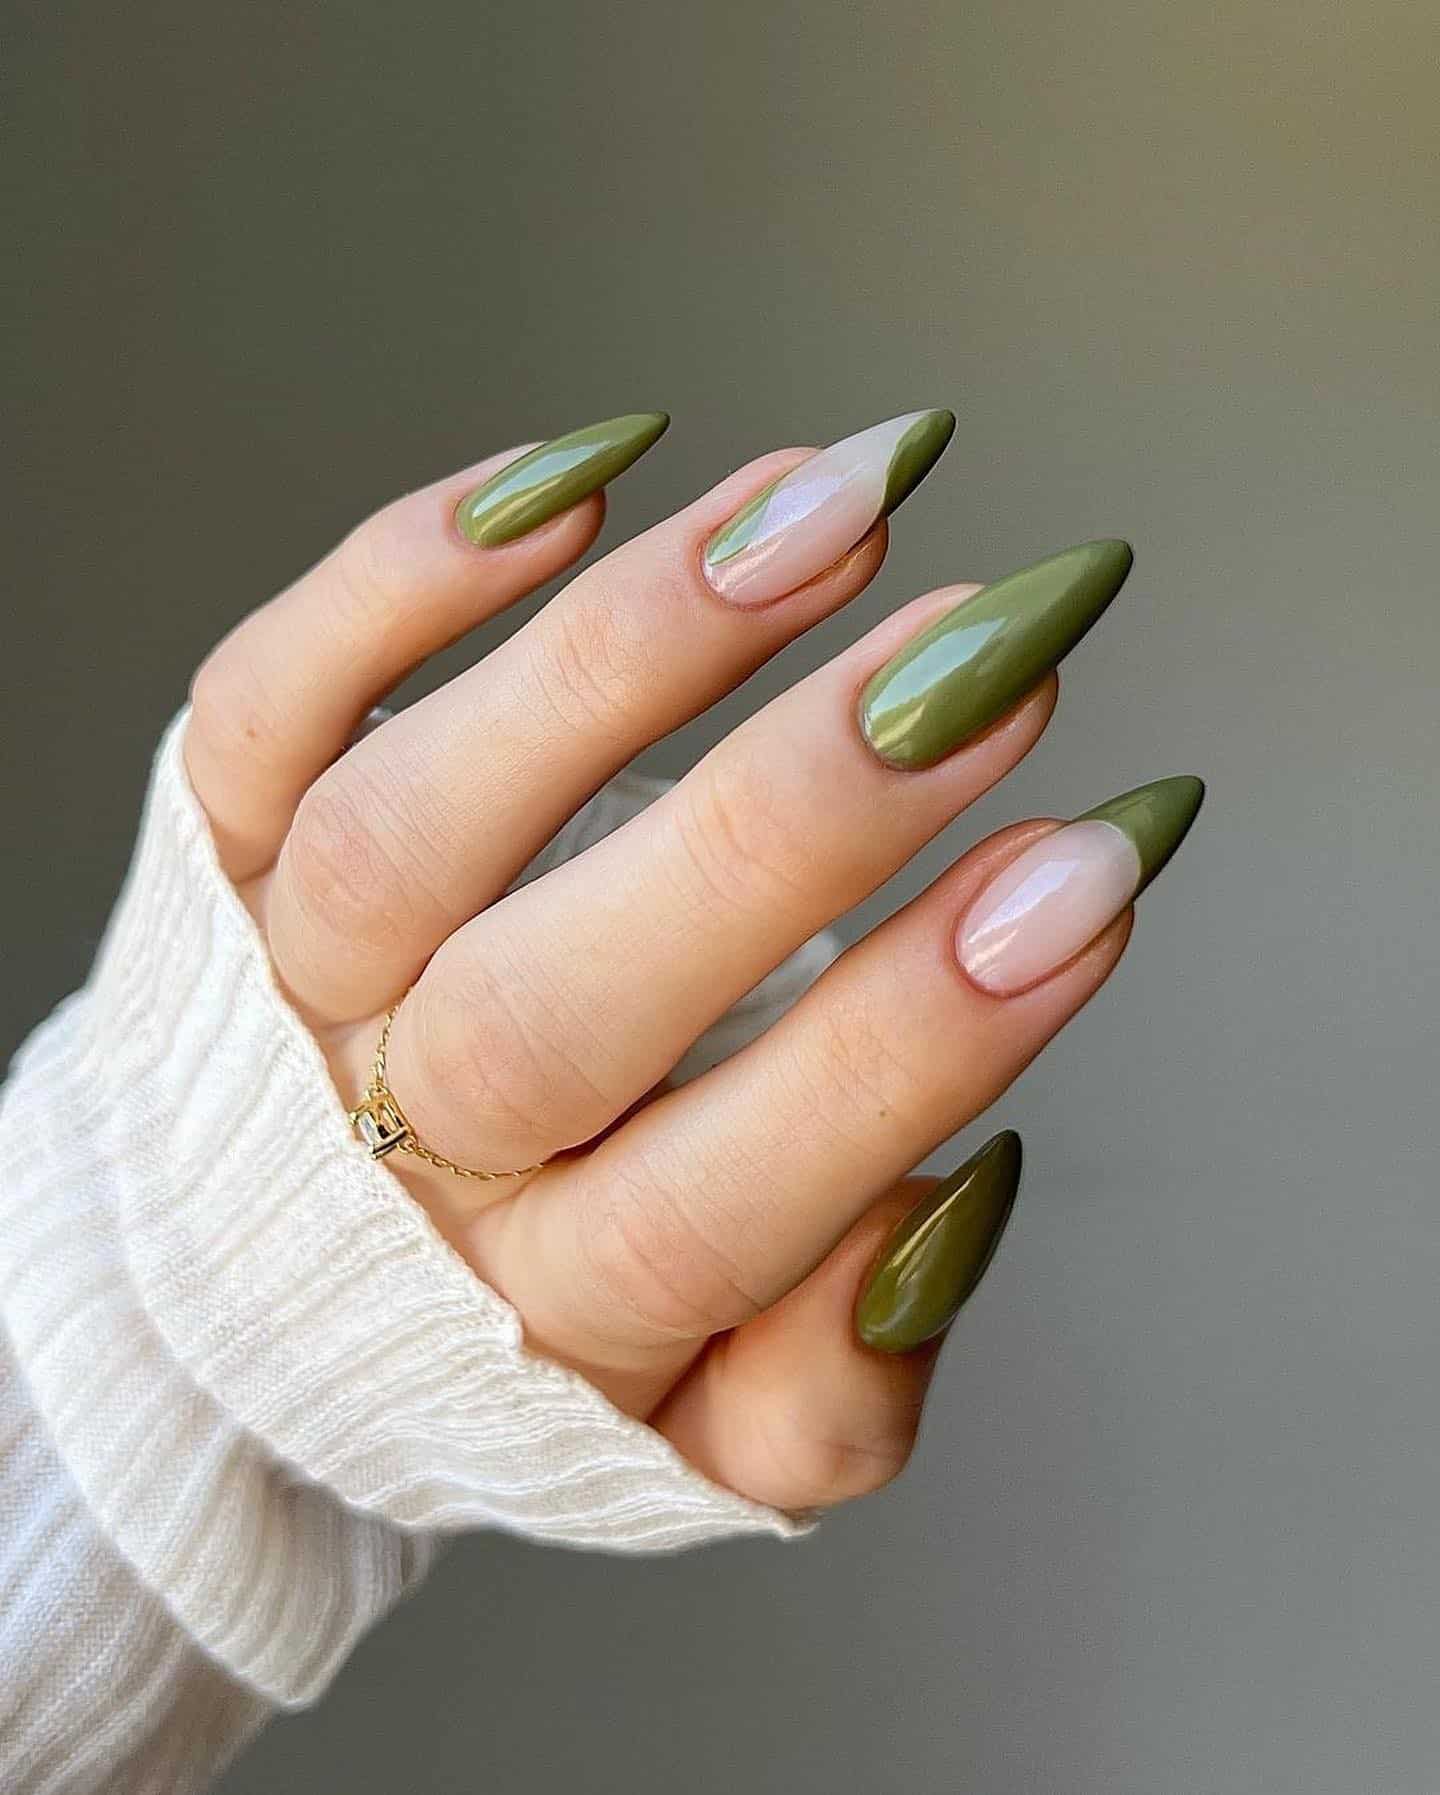 image of a hand with long nails and olive green polish with wave details